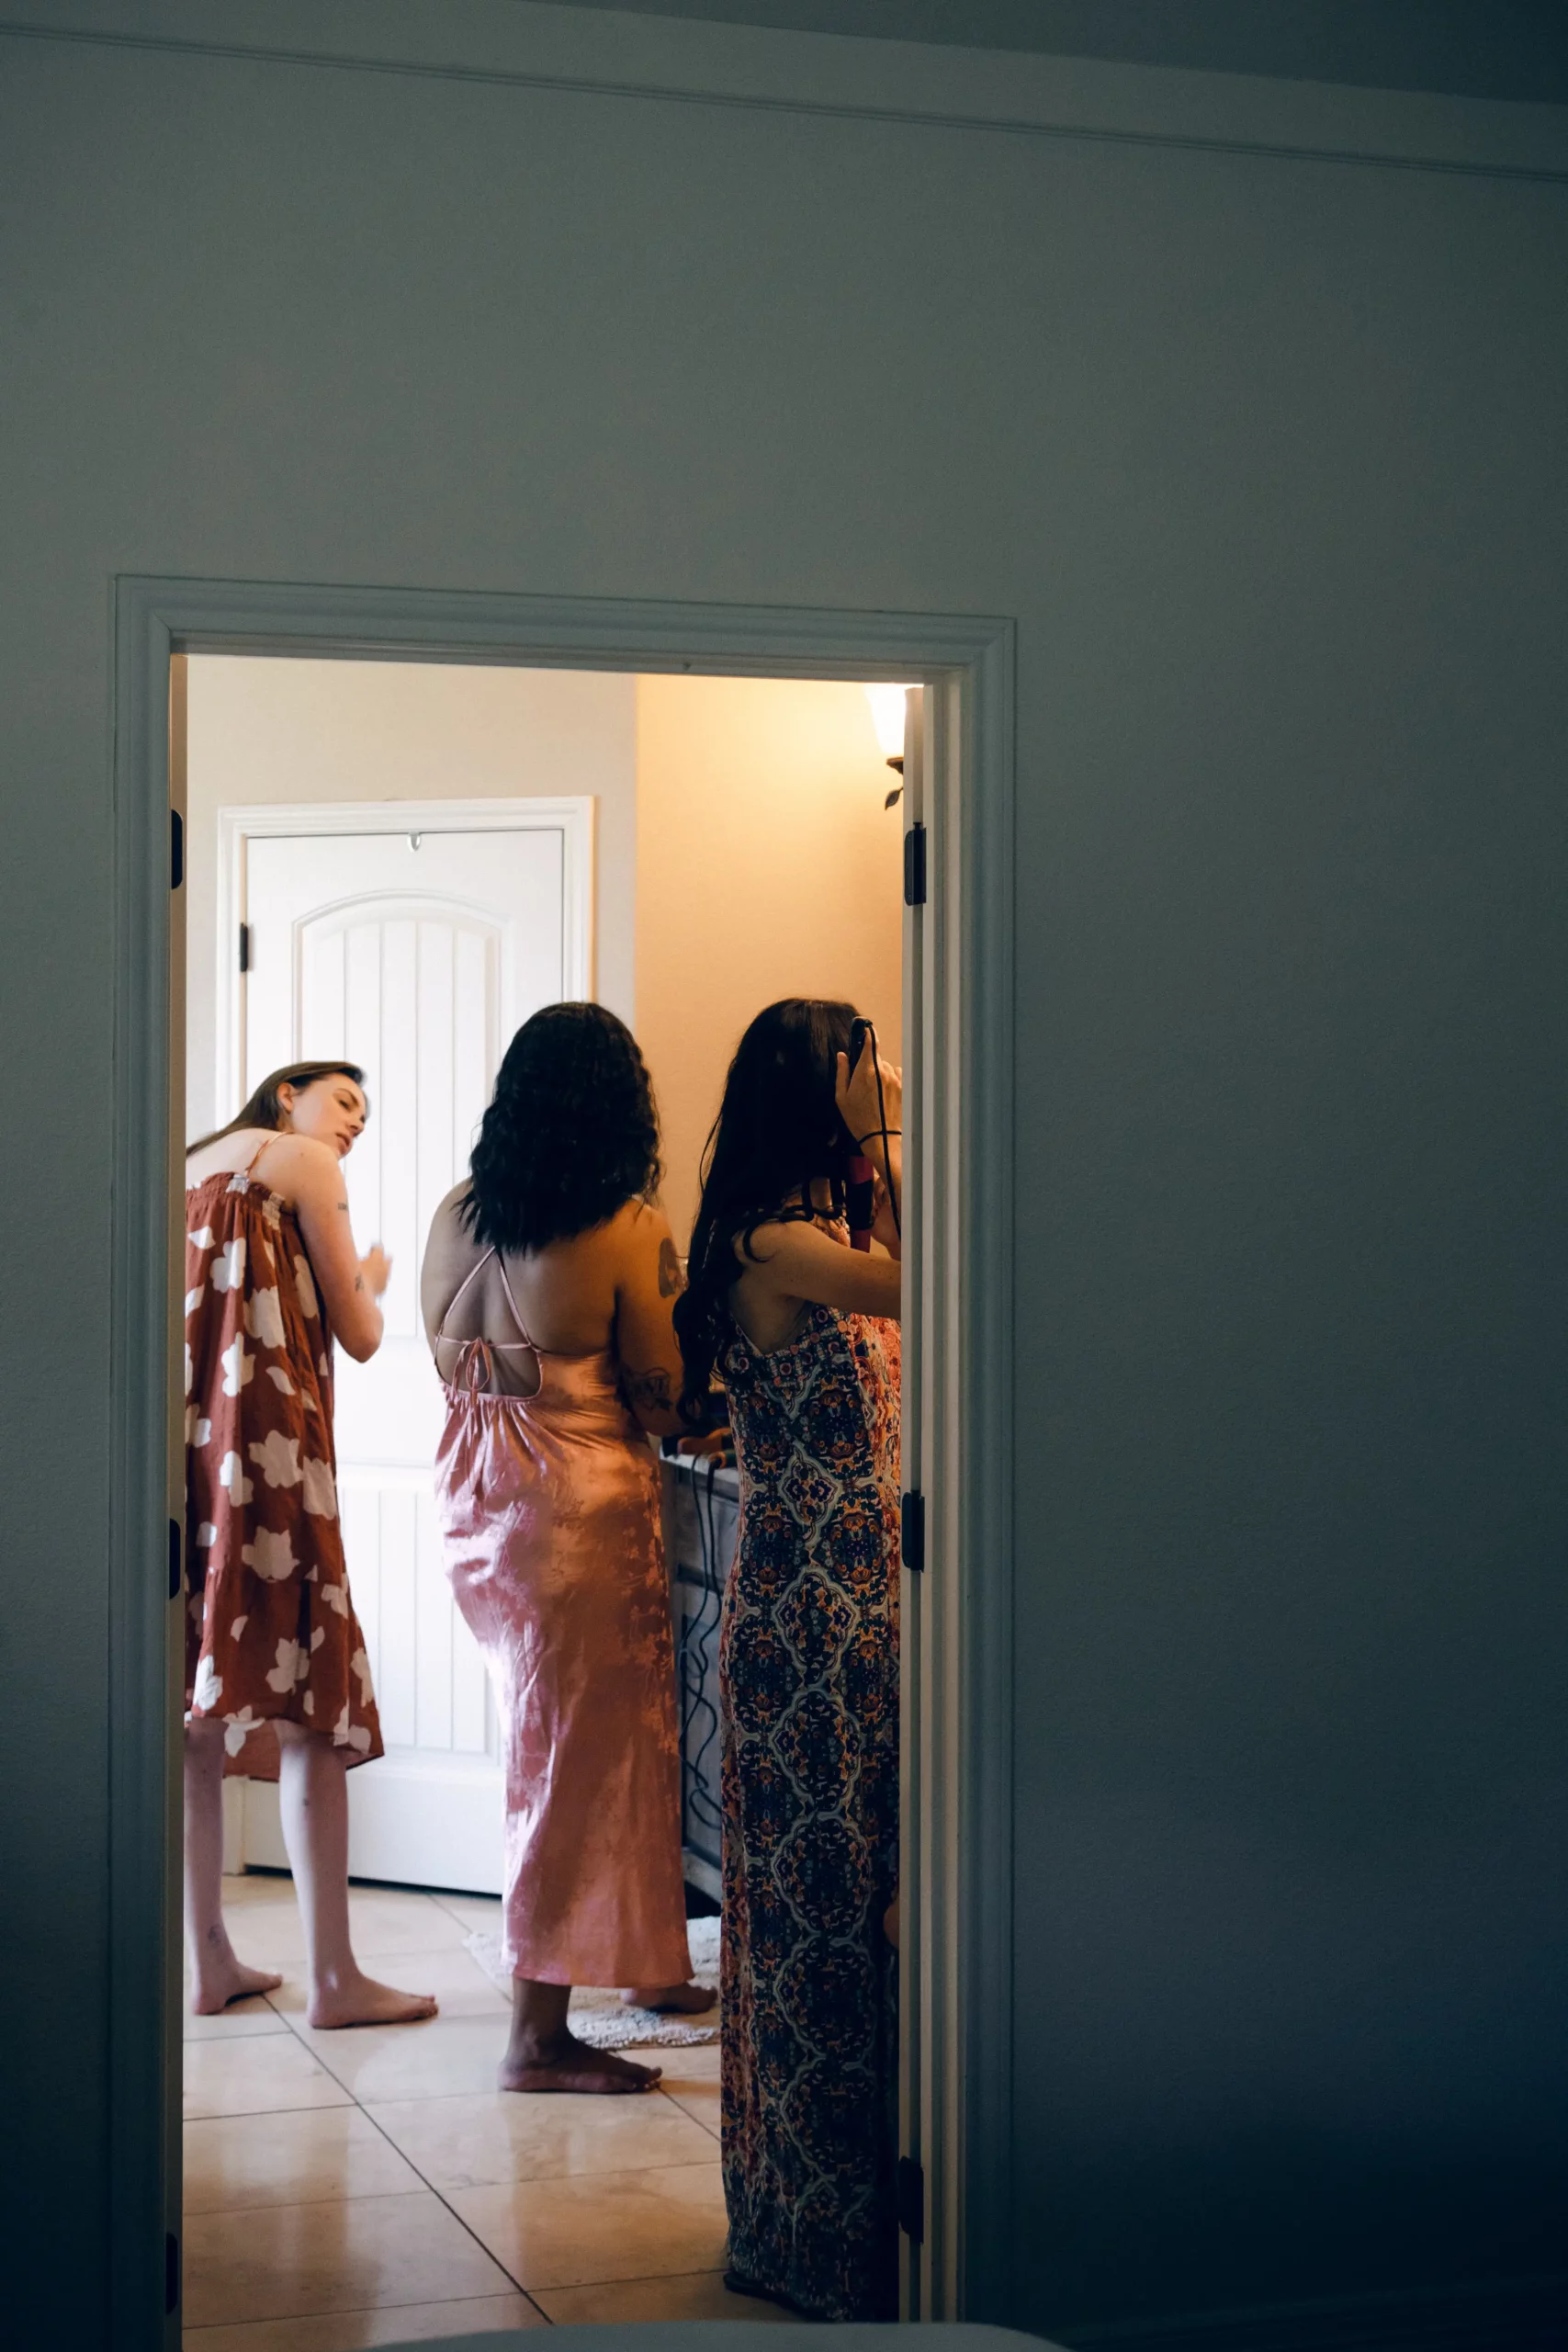 a shot through a door of the bride getting ready in the bathroom with her friends